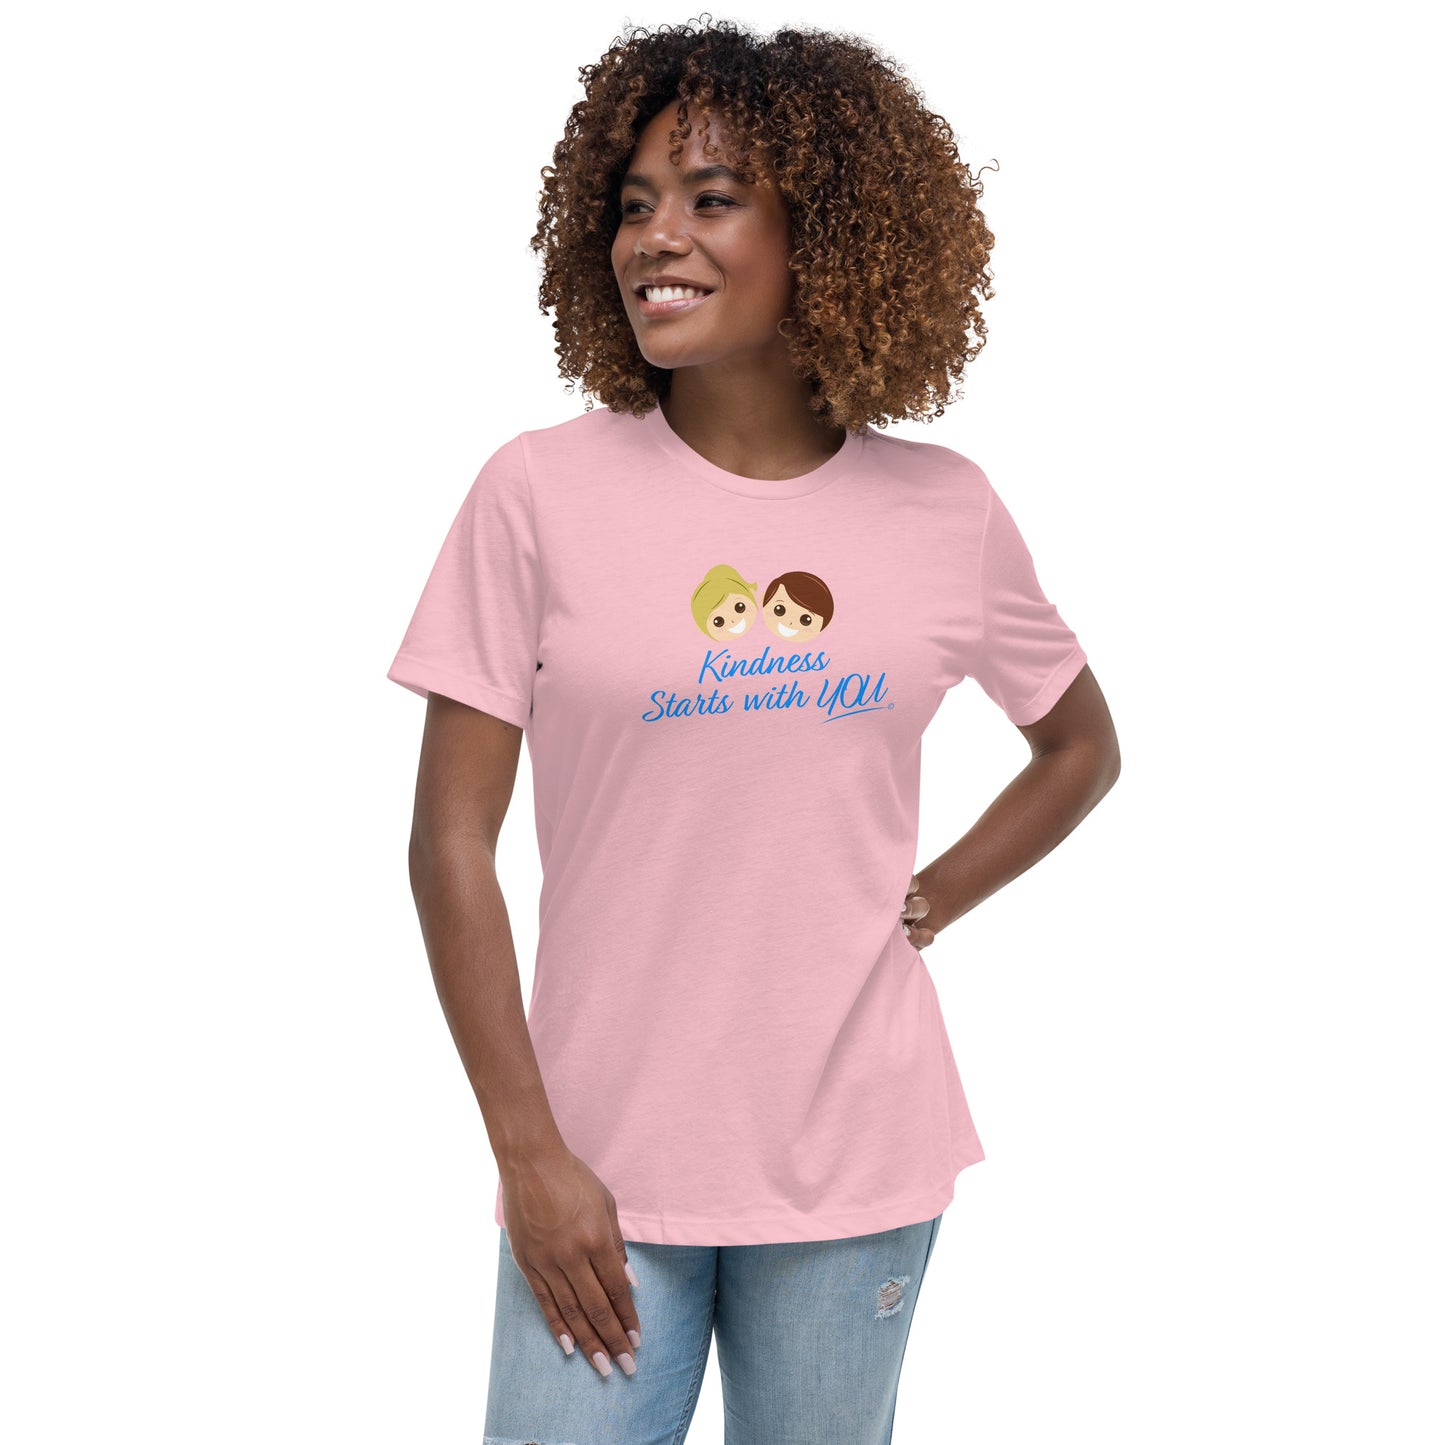 A confident woman showcasing a stylish women's shirt in pink, featuring the empowering quote 'Kindness Starts with You' in bold lettering.